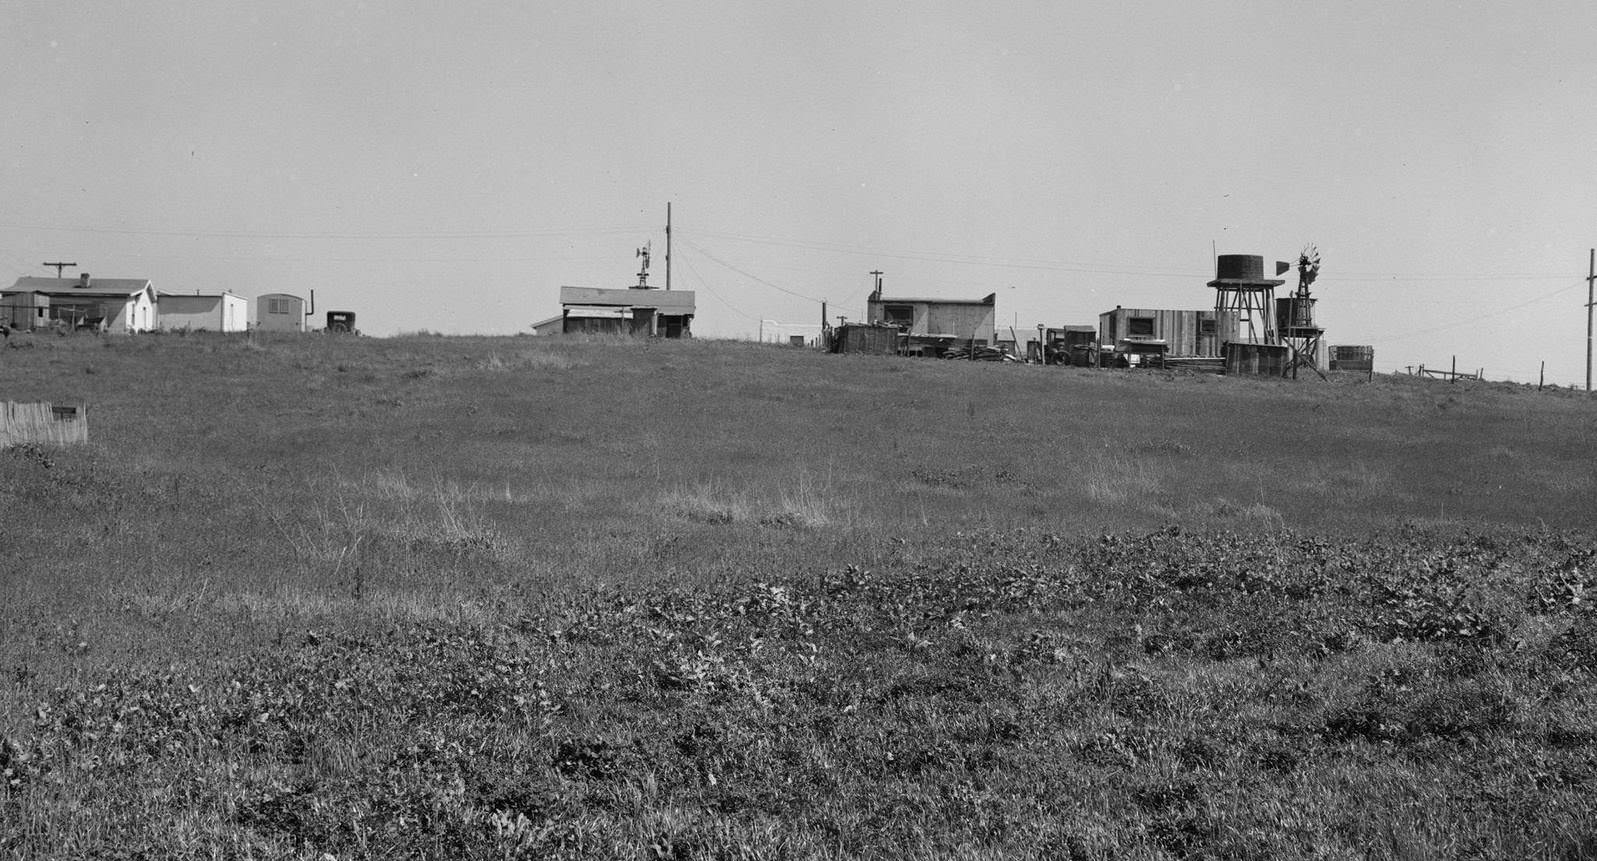 Settlement of small plots held mostly by lettuce shed workers, many from Oklahoma. Outskirts of Salinas, California, 1939